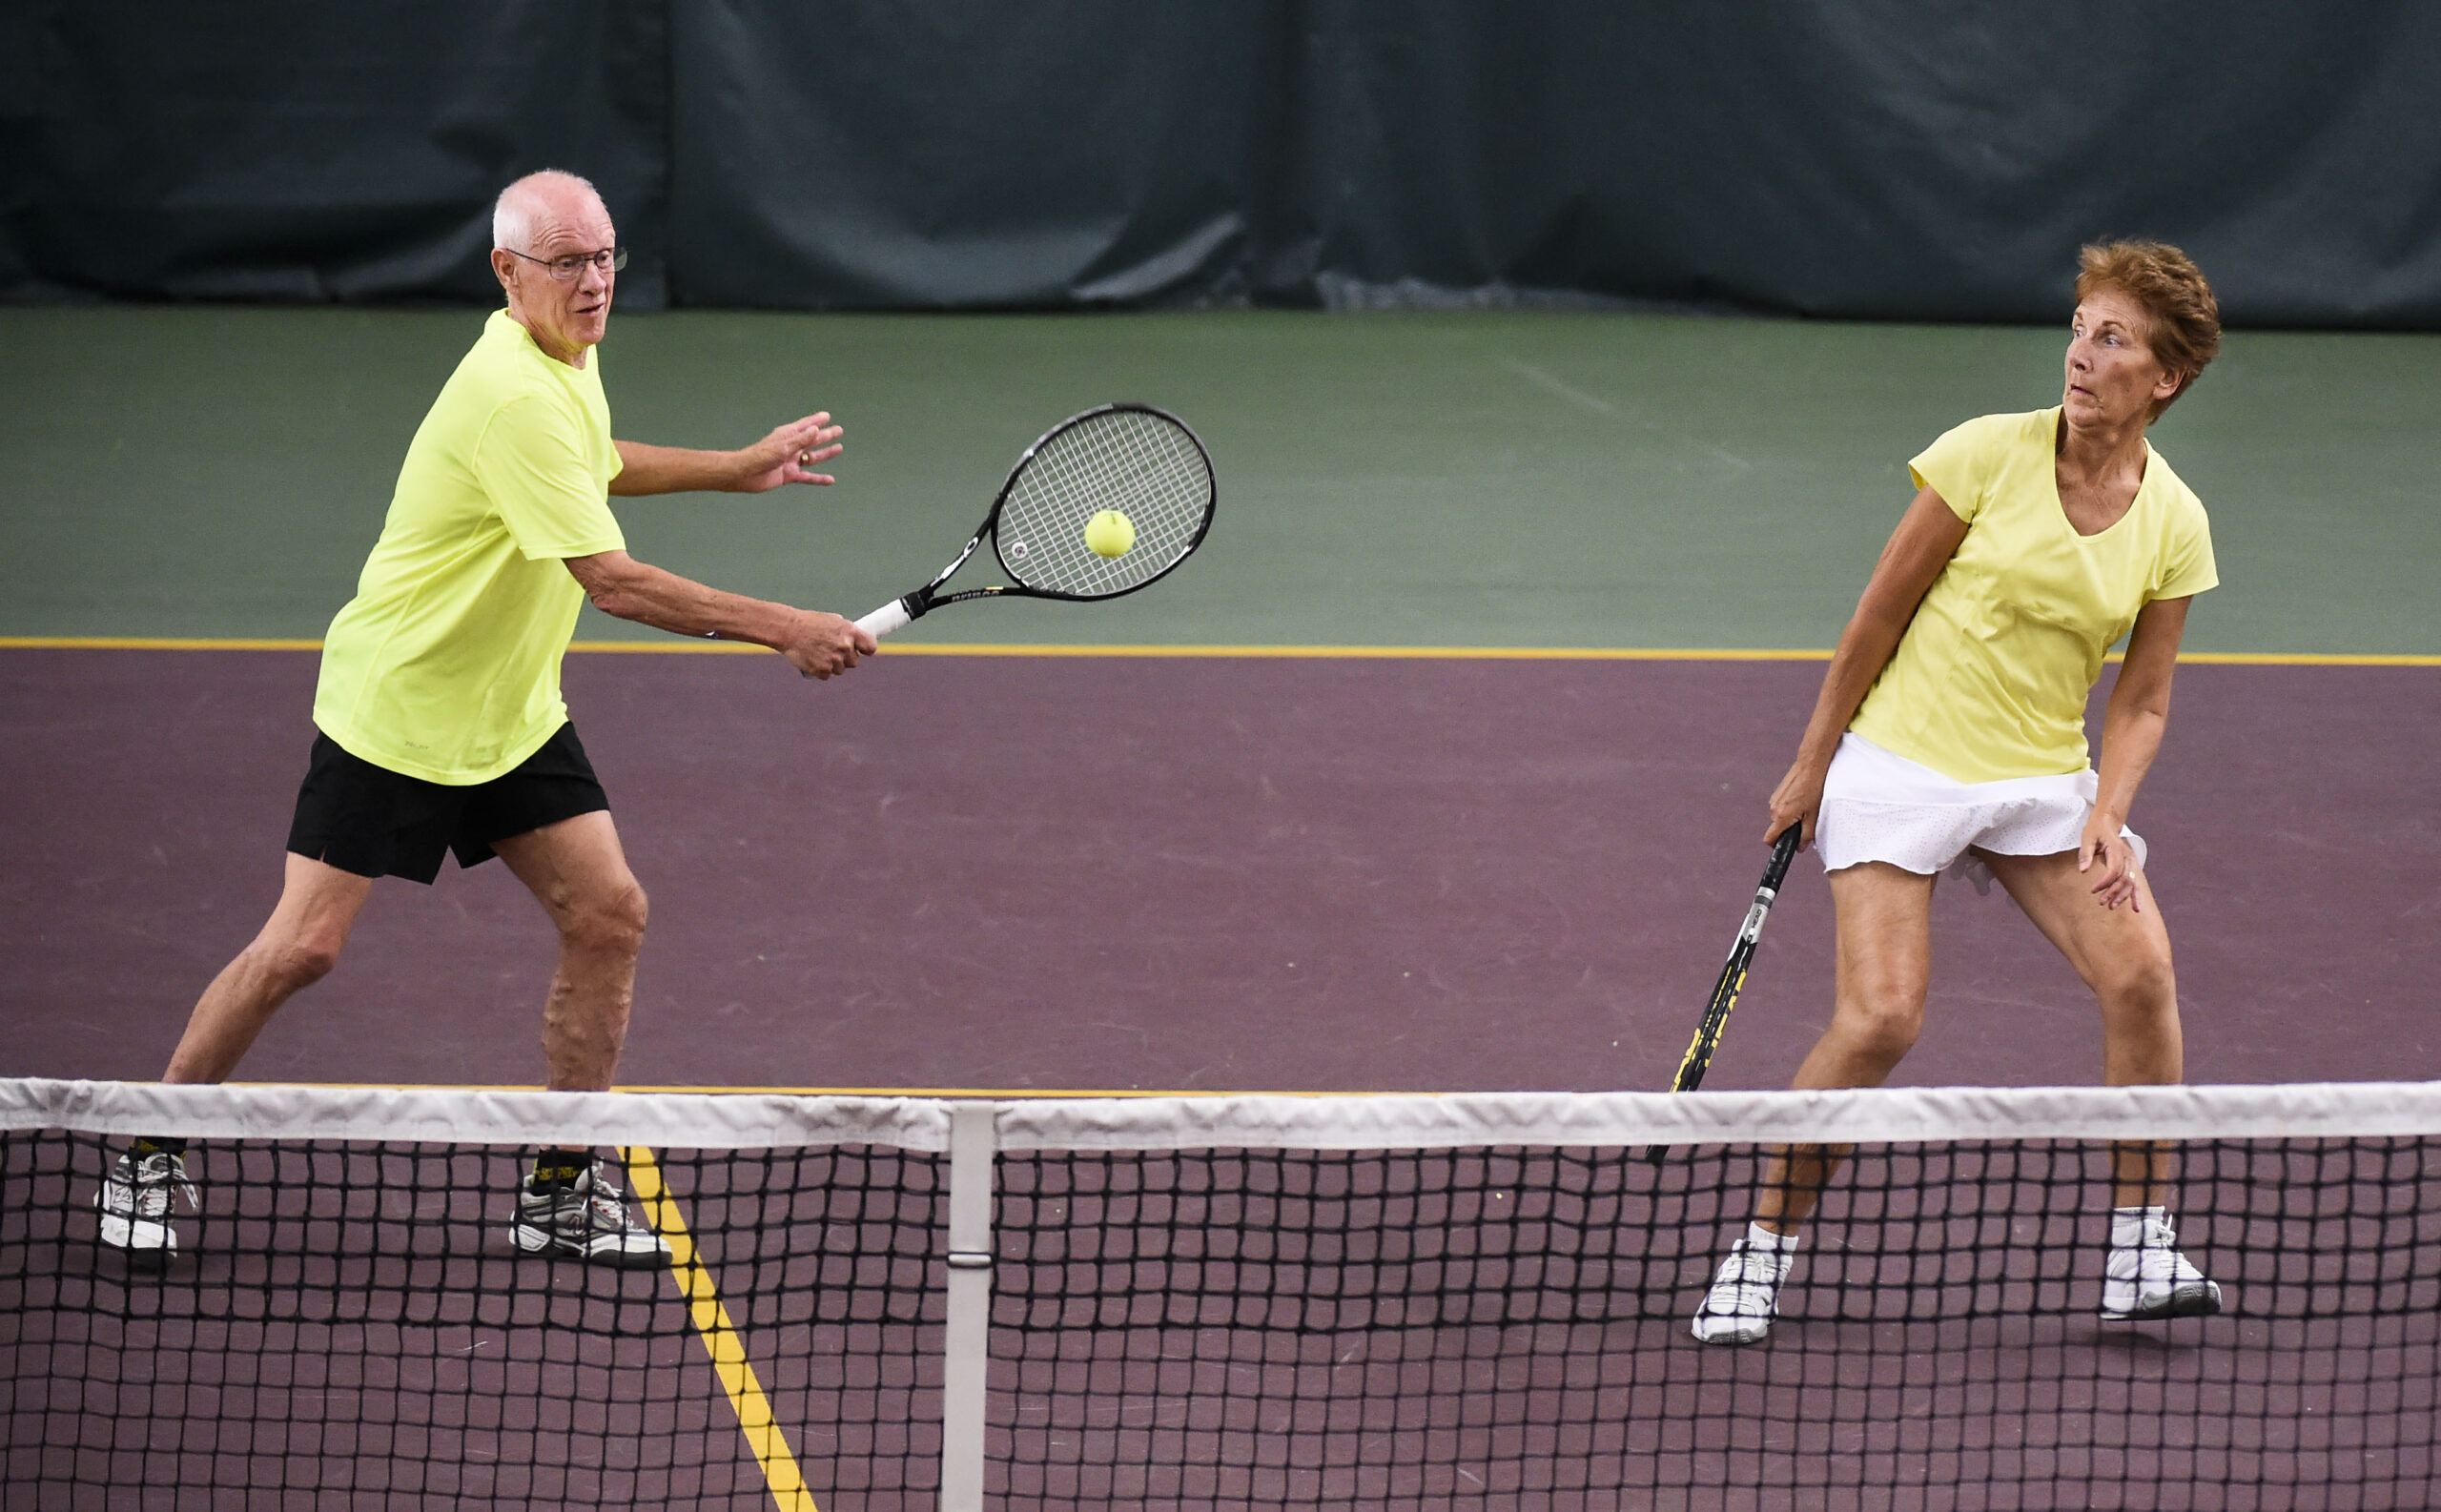 An elderly man hits a tennis ball with his raquet while his partner, an elderly woman, stands next him.